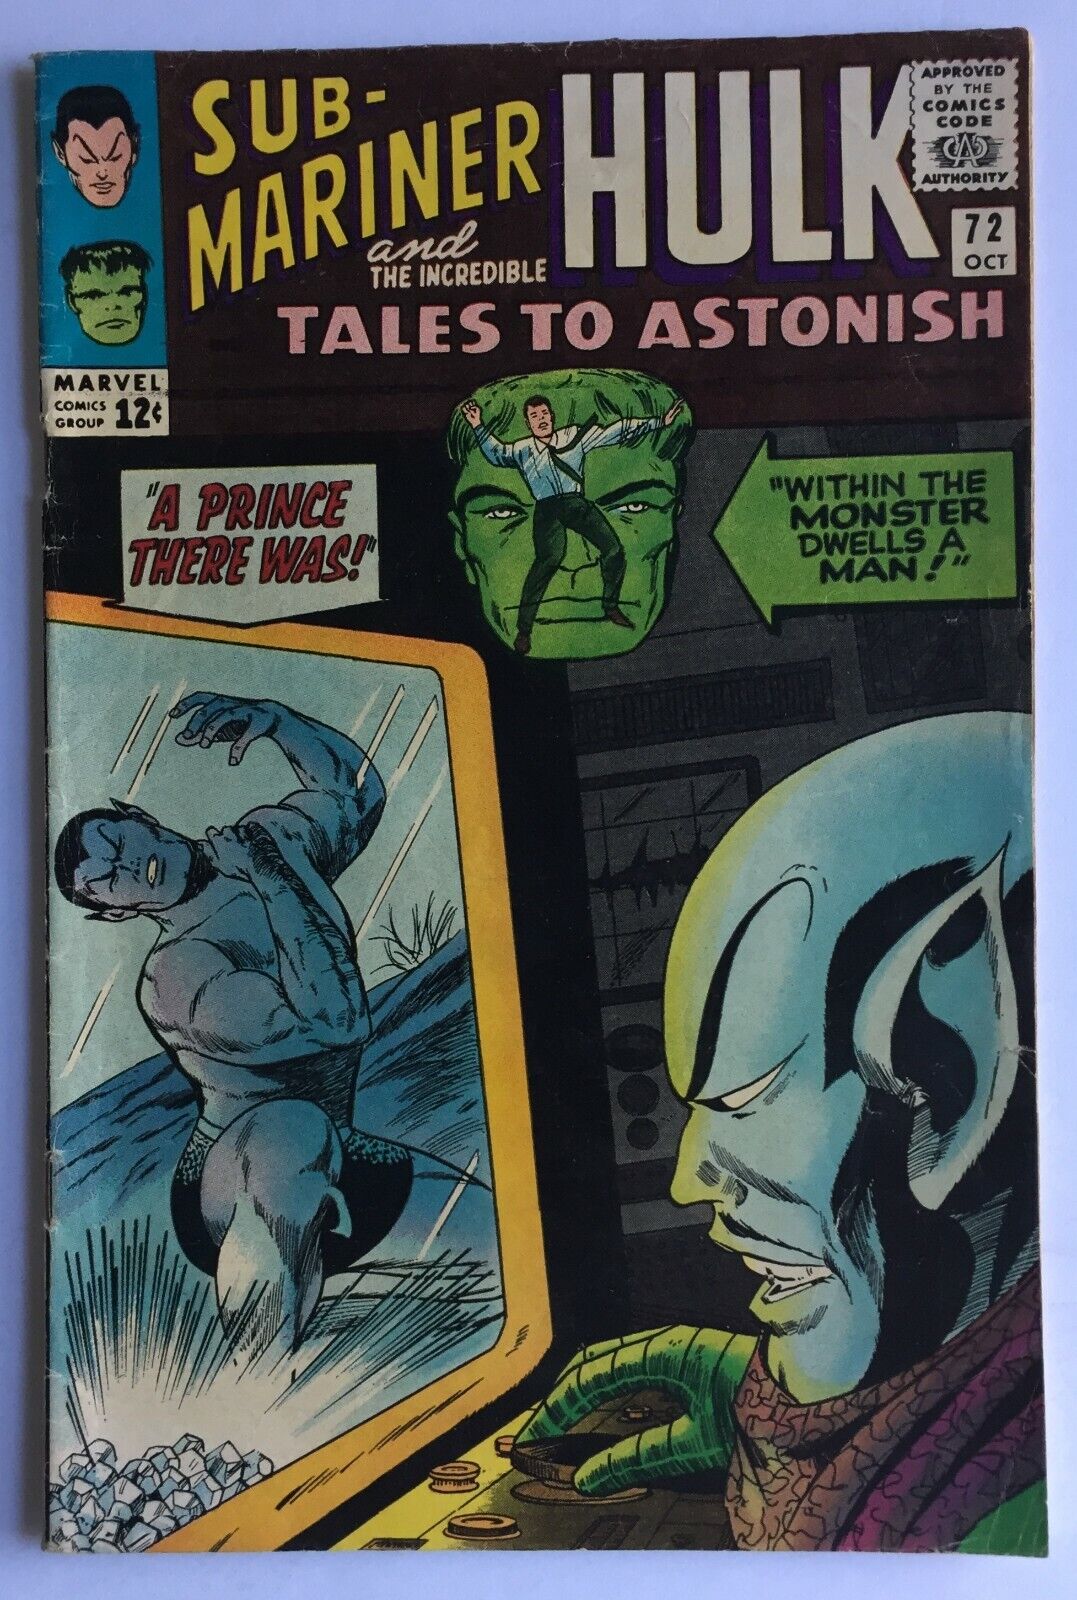 Sub-Mariner and The Incredible Hulk Tales To Astonish #72 (Oct 1965, Marvel)